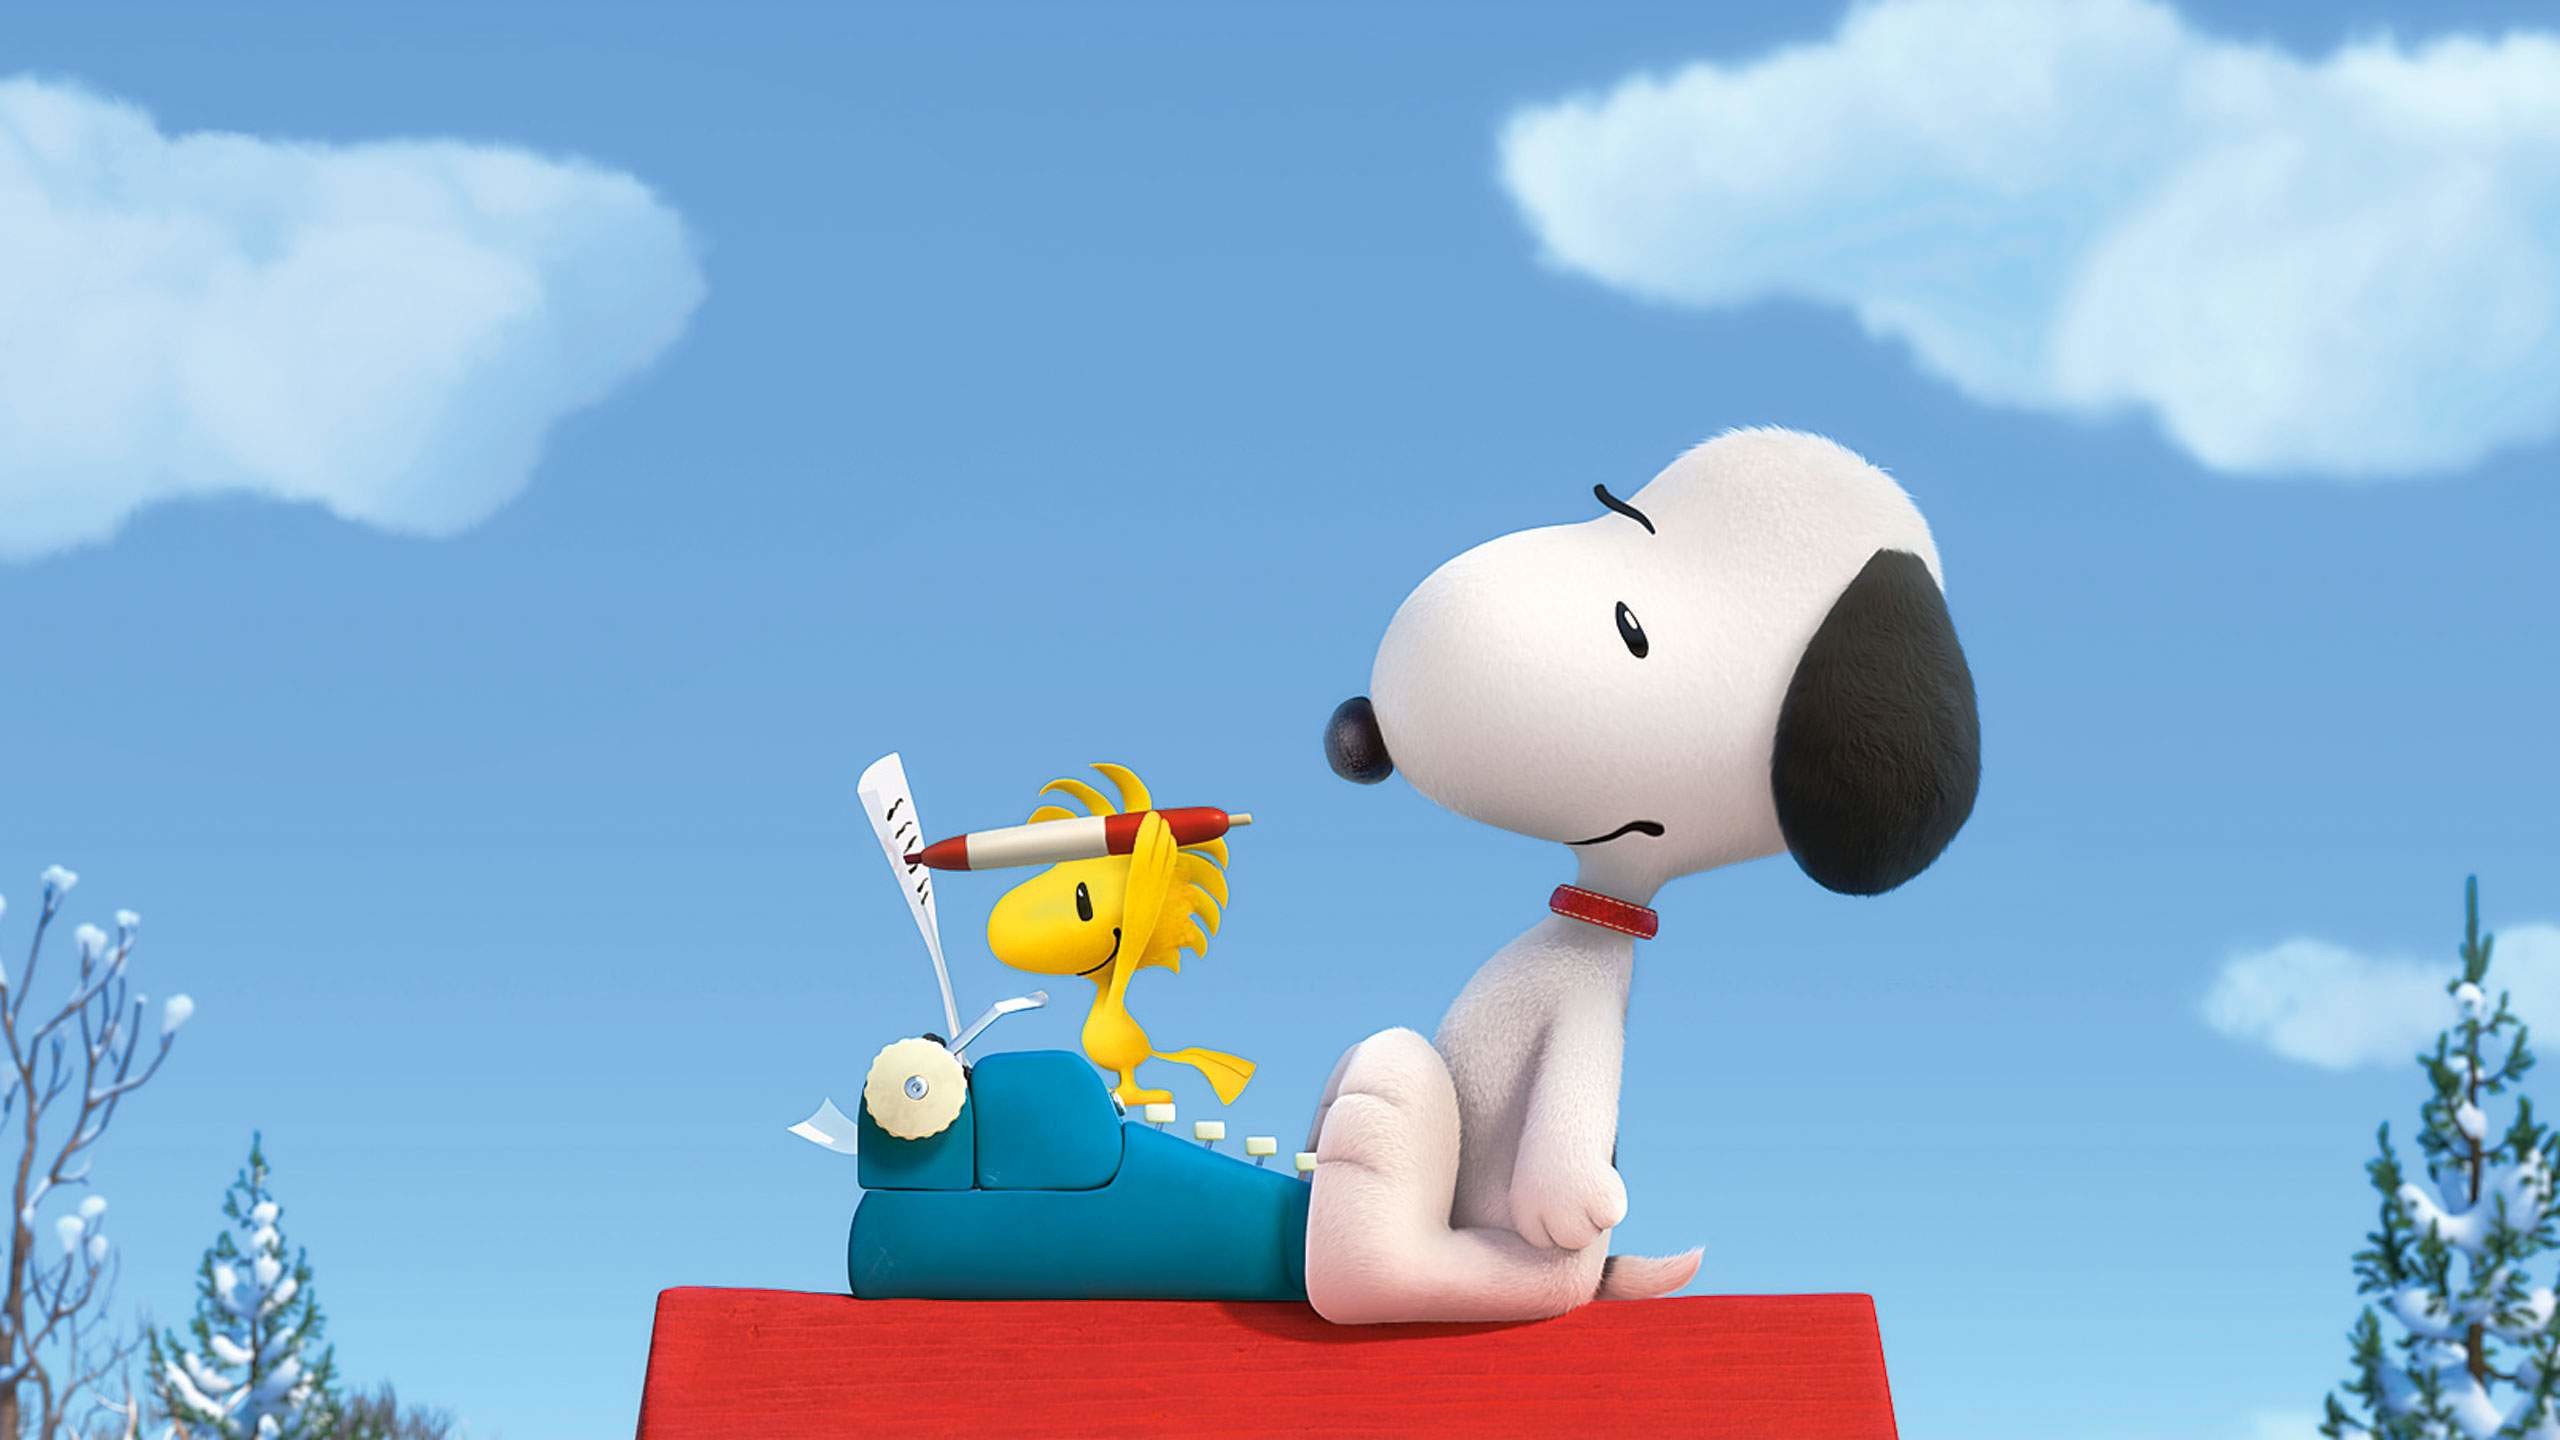 2560x1440 ... 50 Snoopy Wallpapers, HD Creative Snoopy Images, Full HD Wallpaper